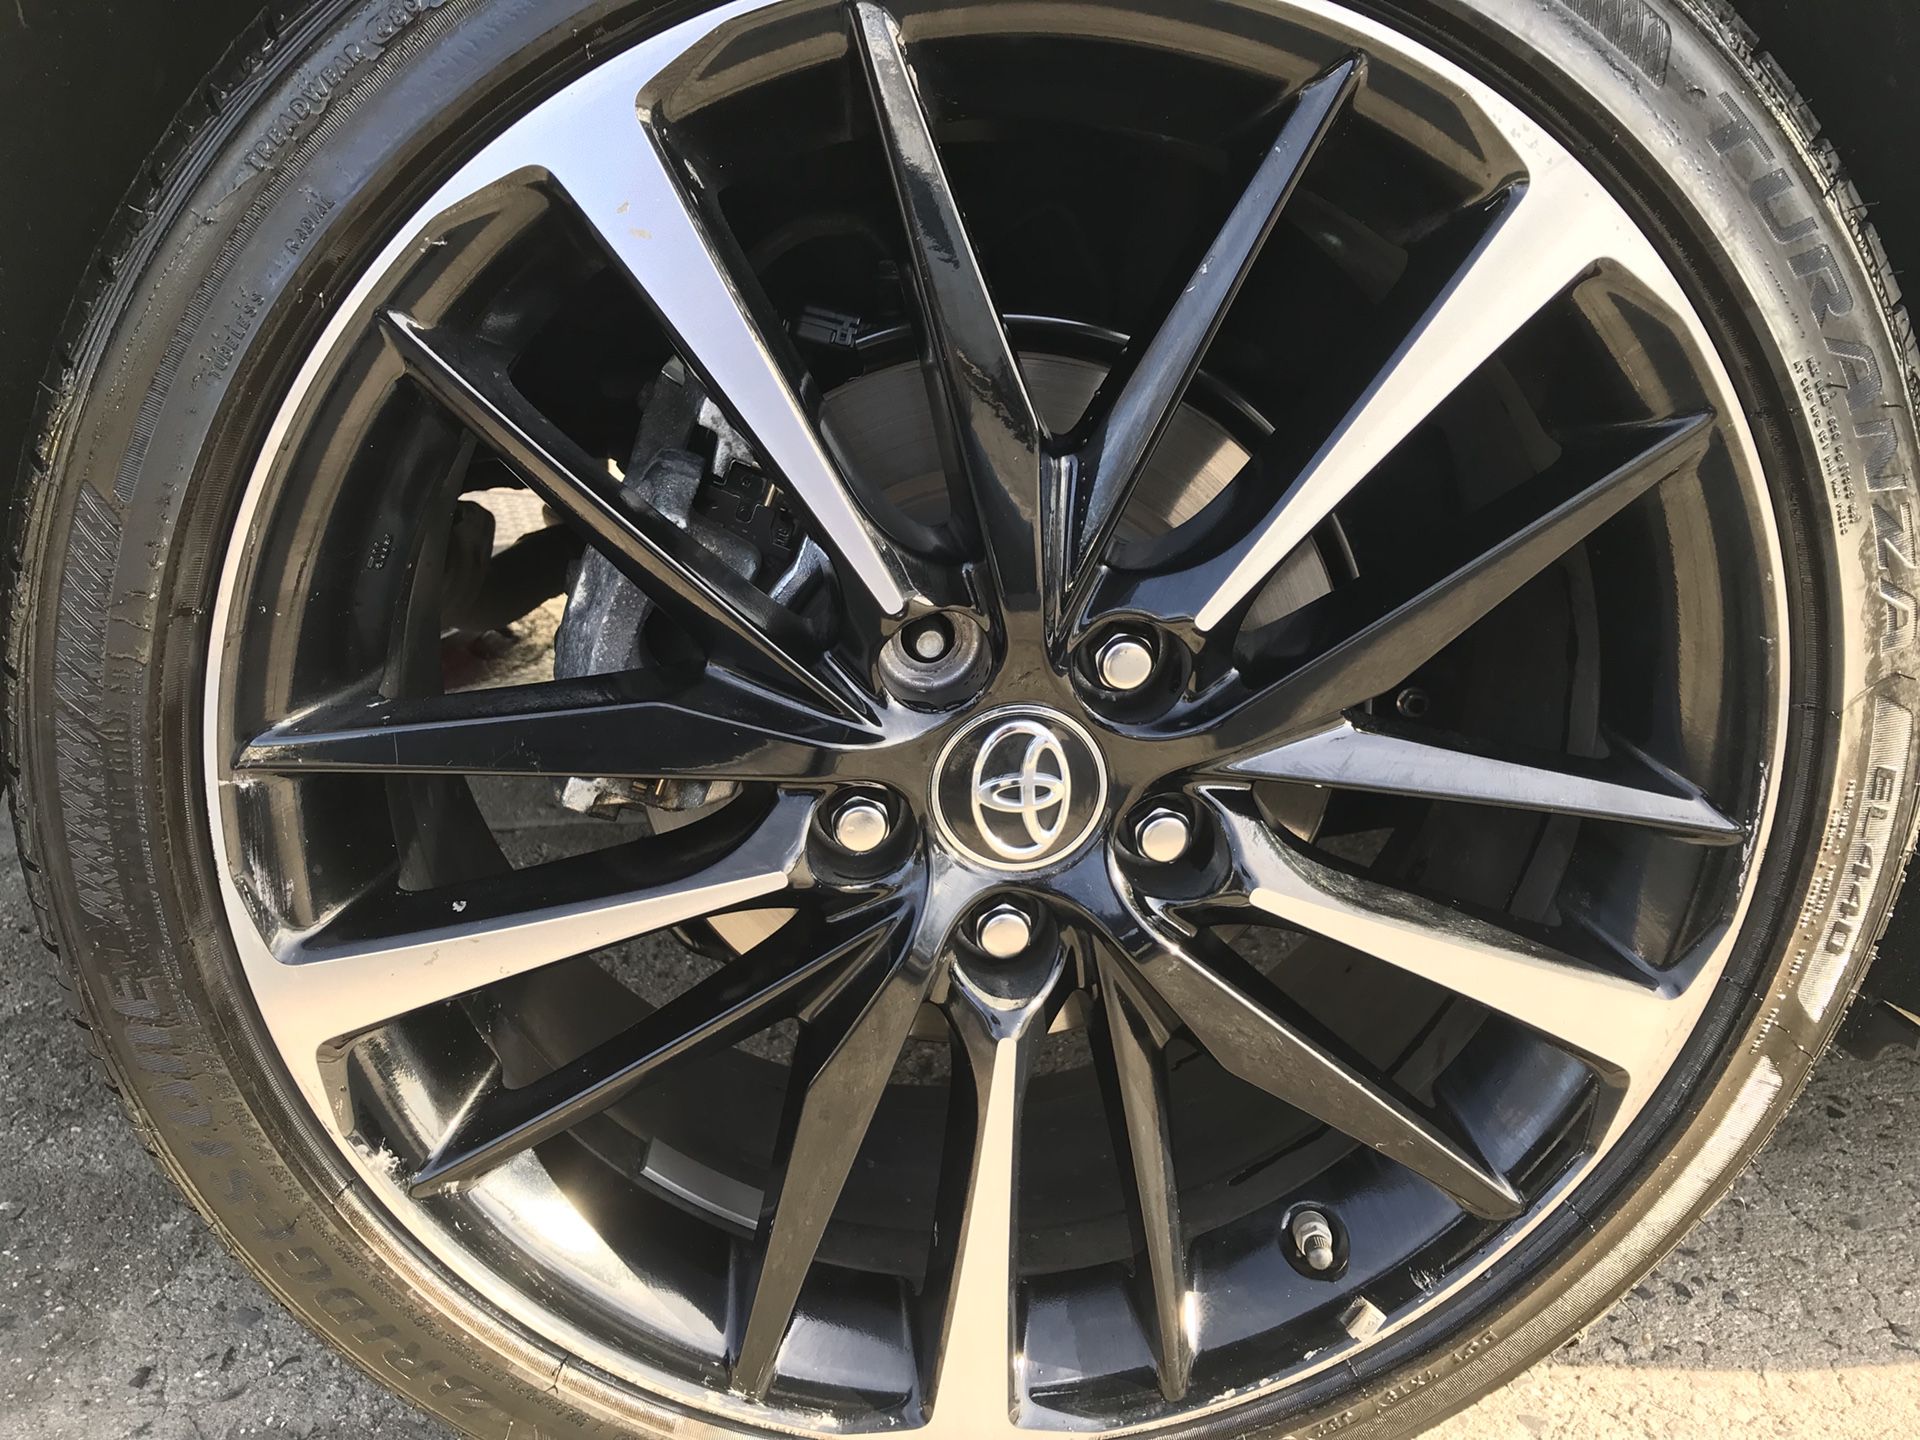 I have available only one 19” rims Toyota Camry 2018 xse OEM wheels rims with tires 2014 2015 2016 2017 RAV4 Avalon CHR US $250